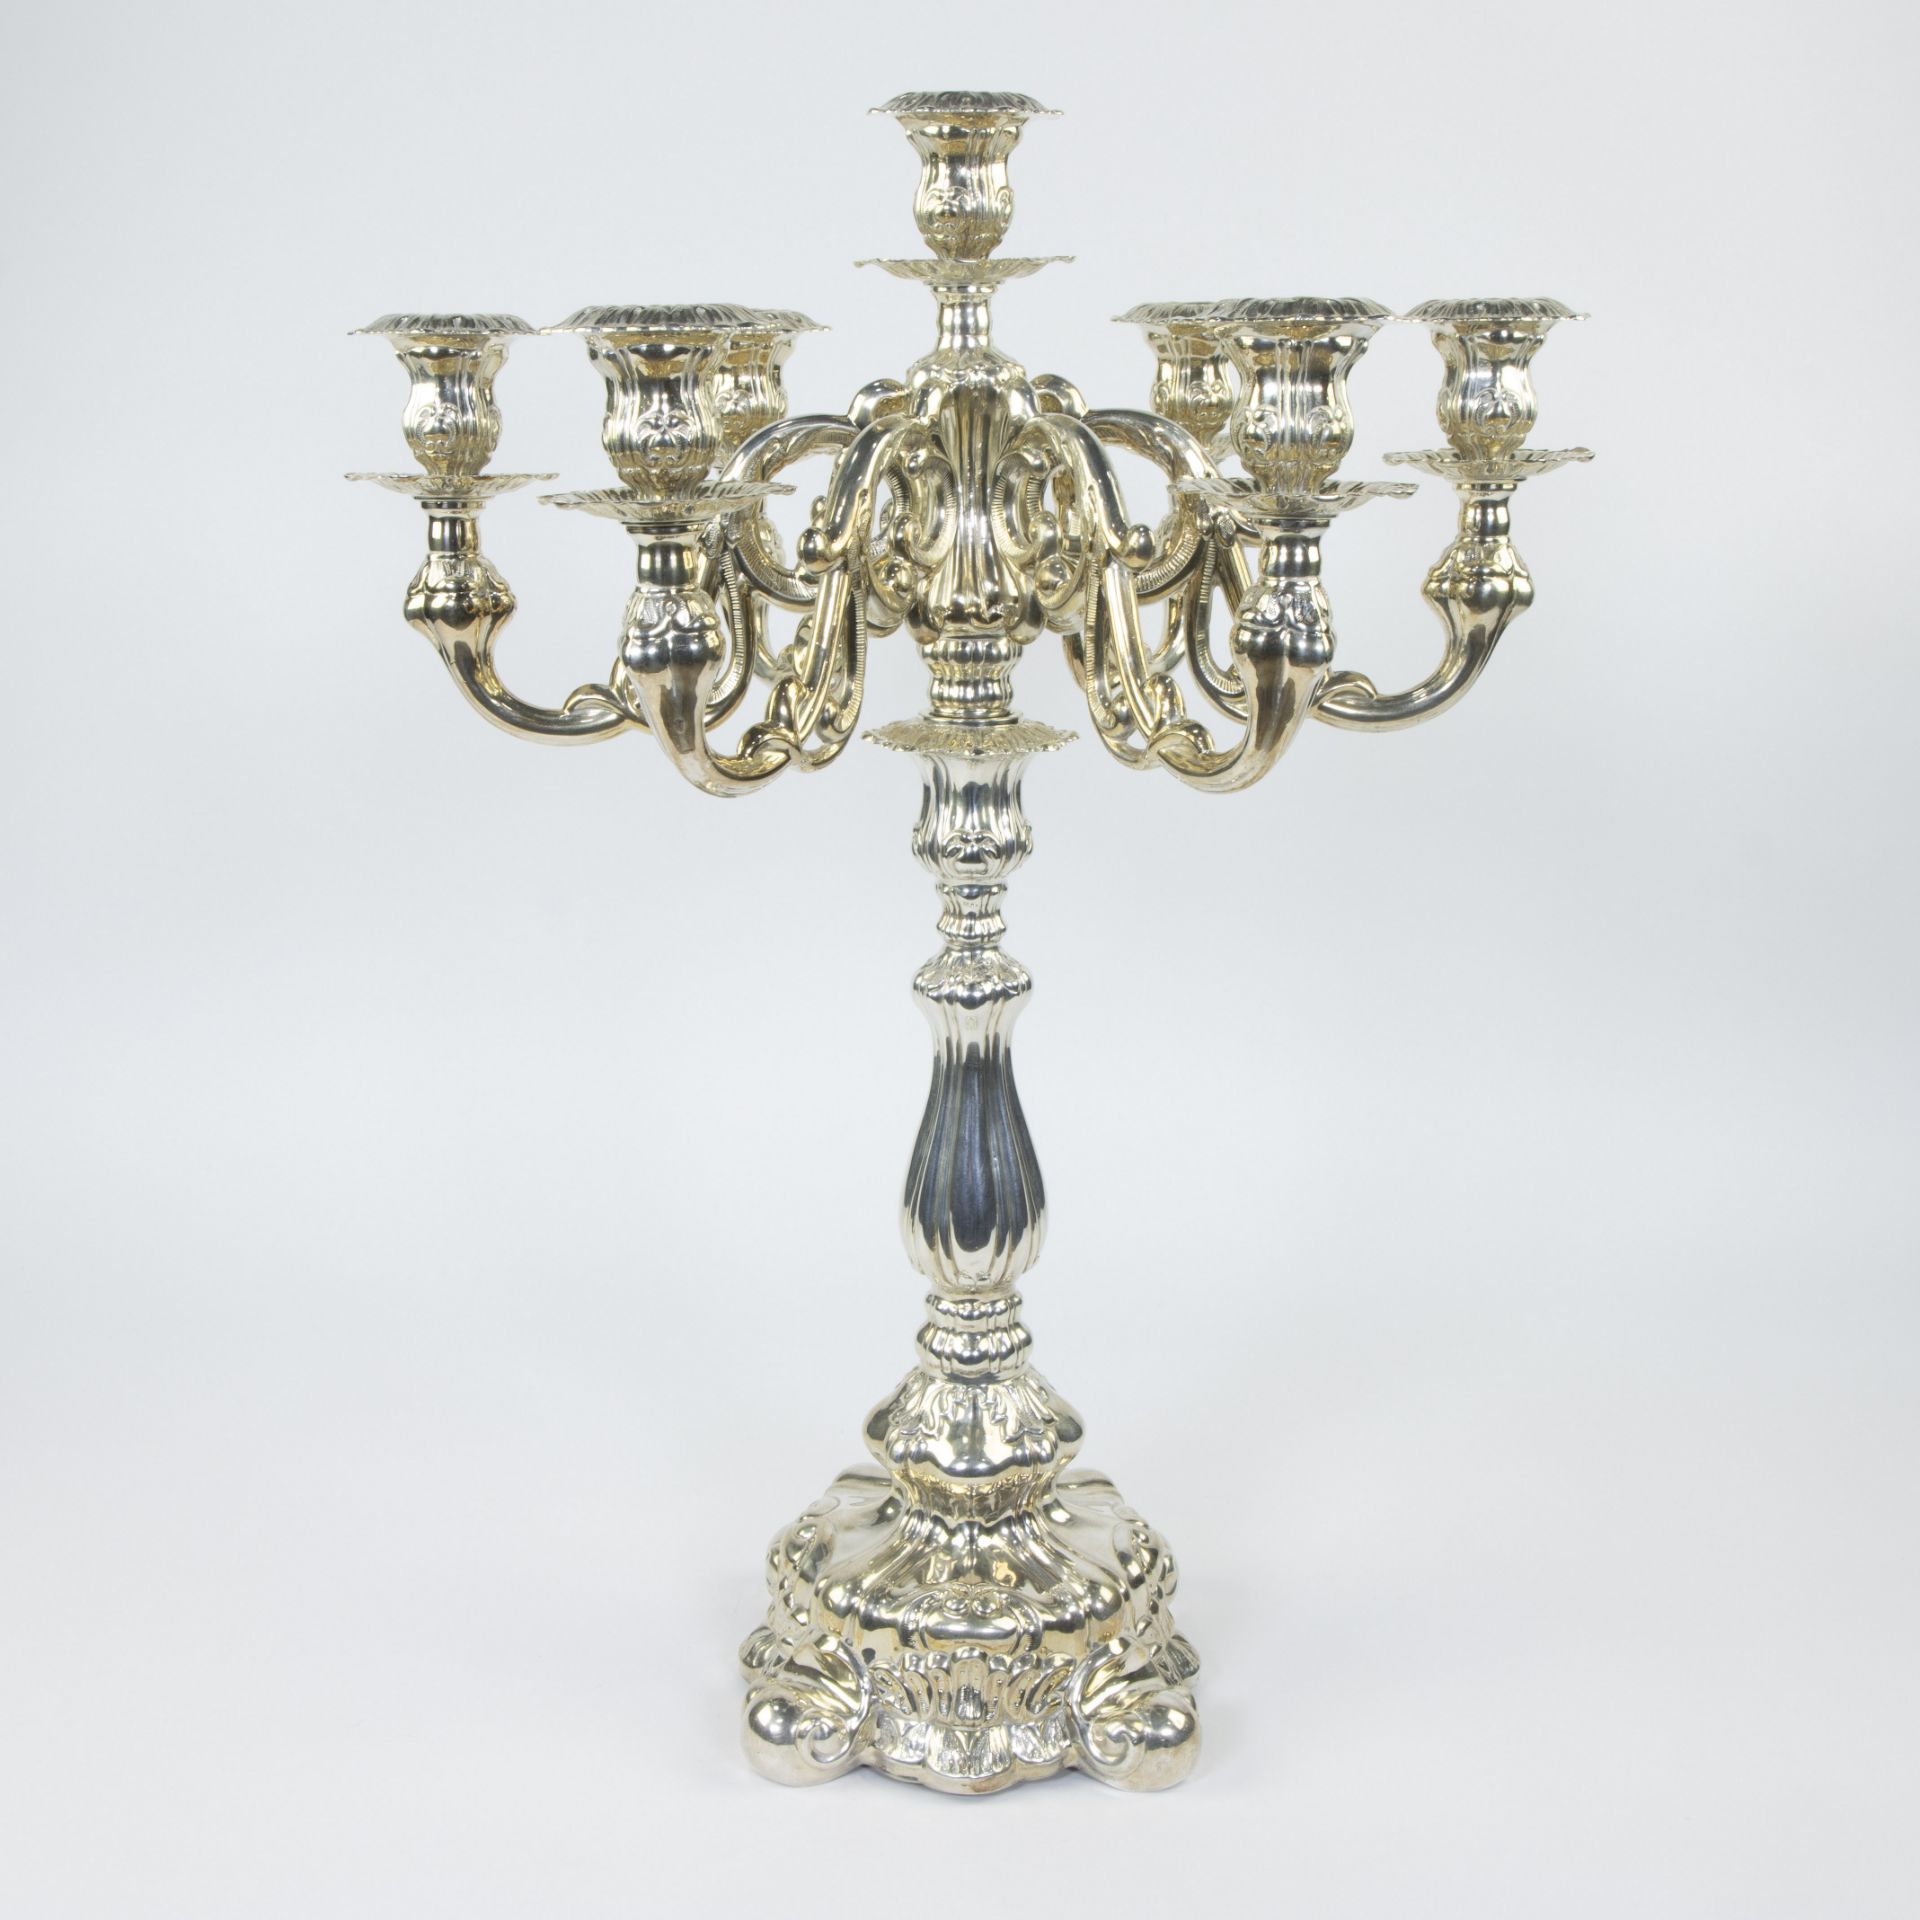 Large silver candelabra with 7 lights, grade 925/1000 , with year letter H, Netherlands, hallmarks (